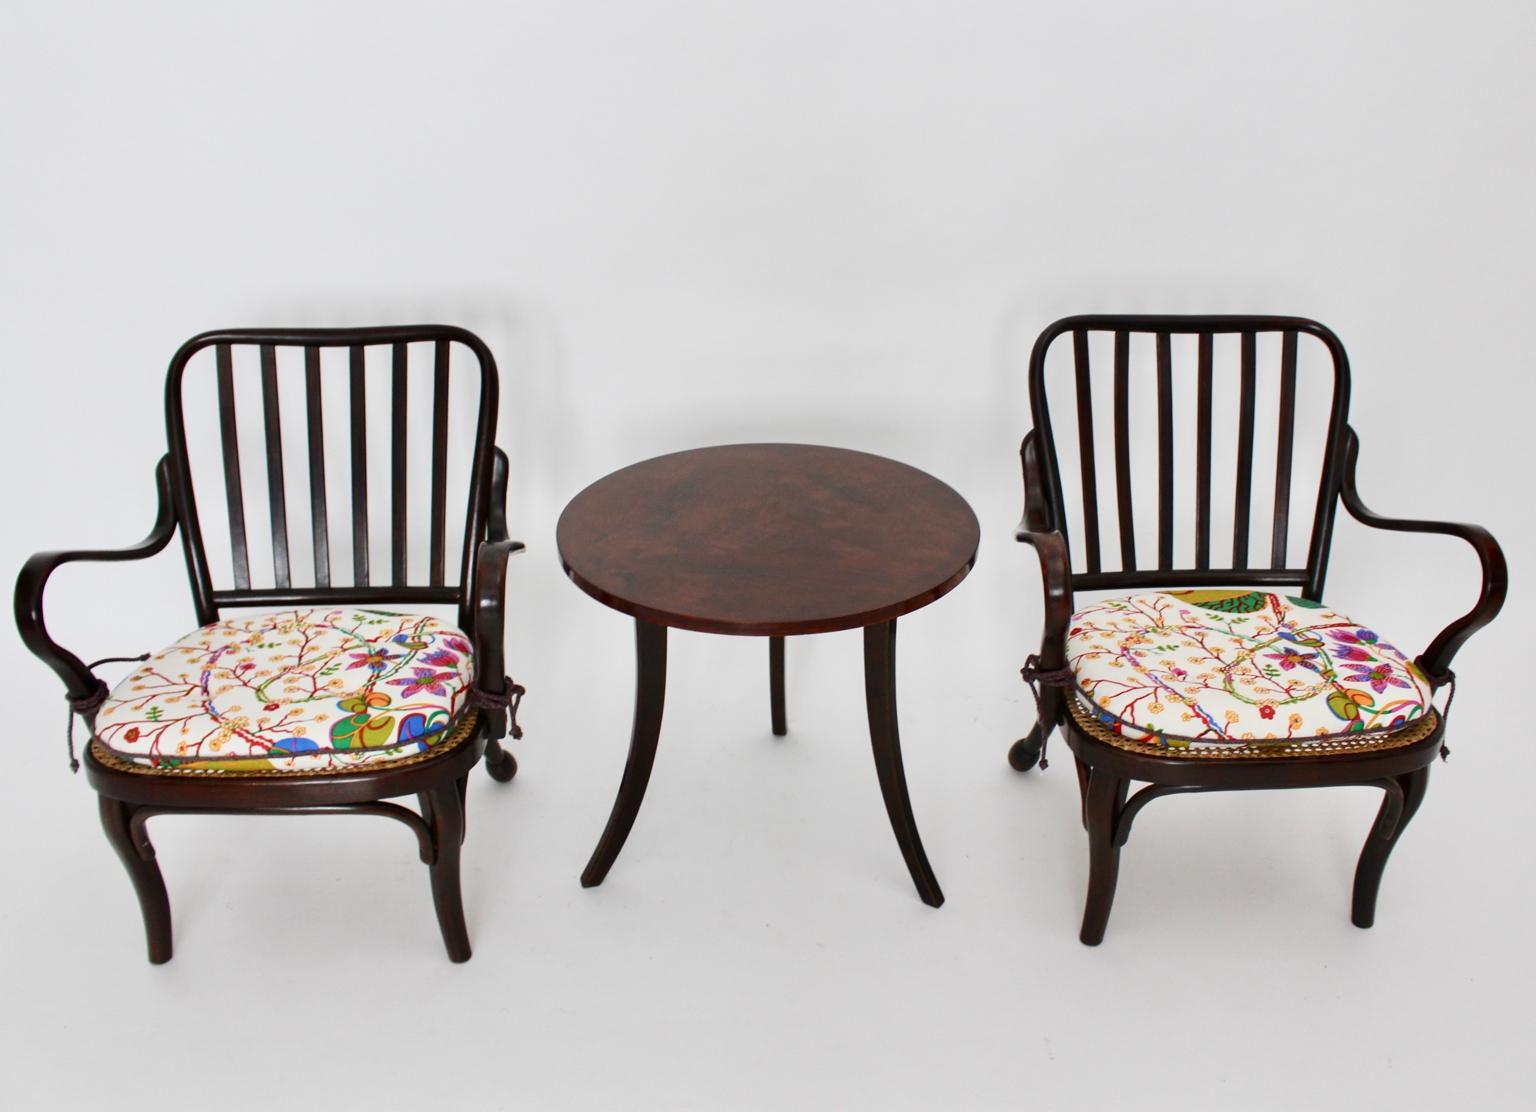 Austrian Art Deco Vintage Wood Armchairs and Coffee Table by Josef Frank Vienna For Sale